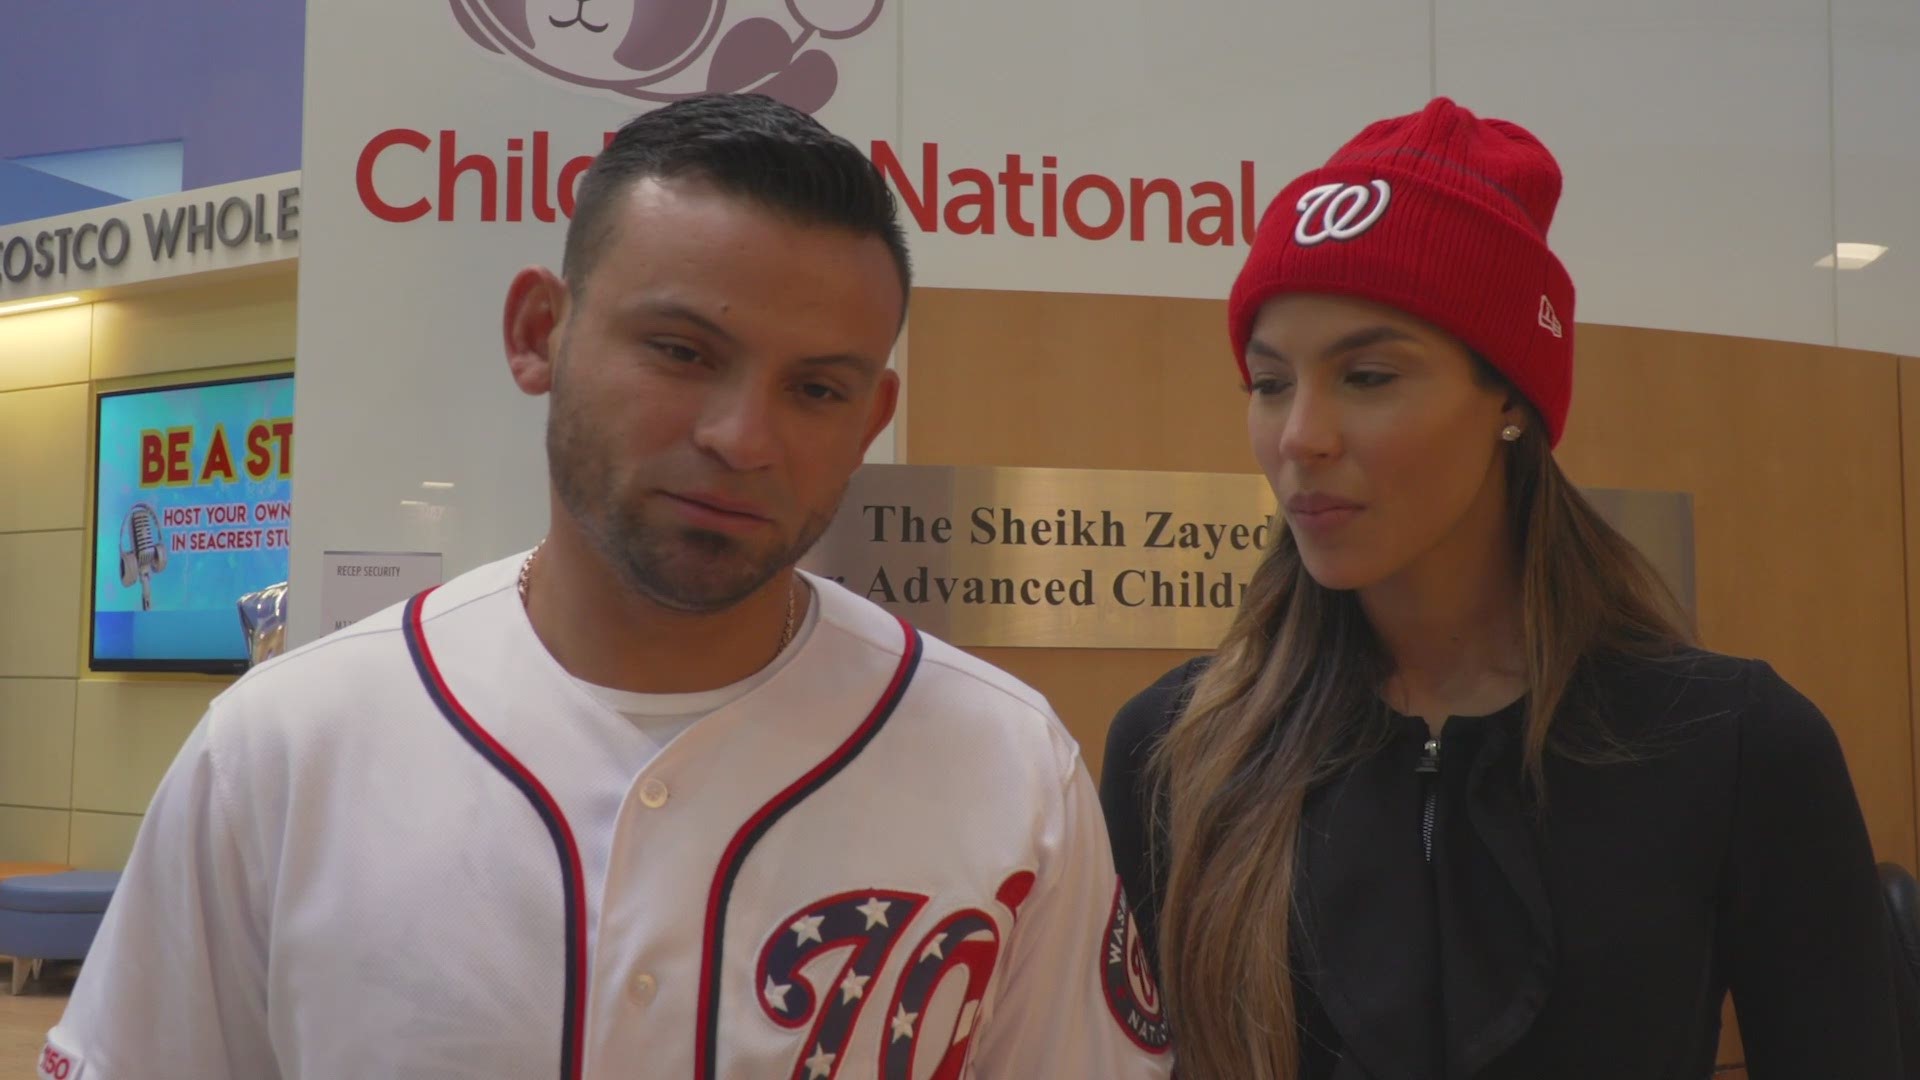 Gerardo Parra and his wife visited Children's National Hospital to spread some joy before the World Series.